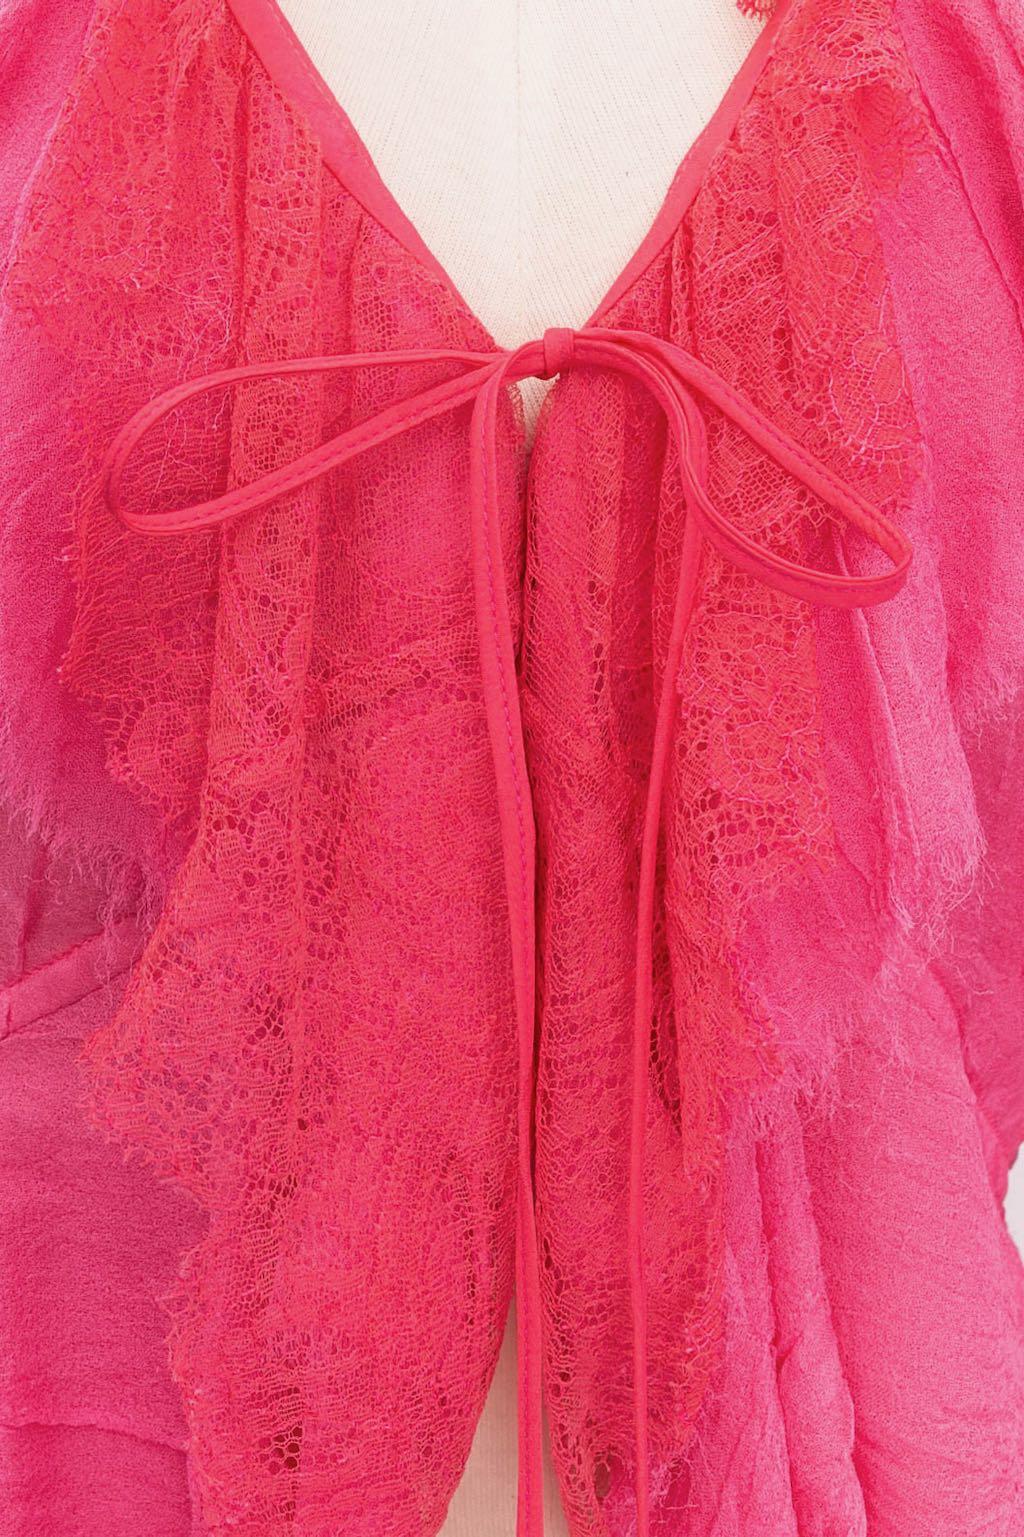 Christian Lacroix Pink Set in Lace and Silk Crepe For Sale 8